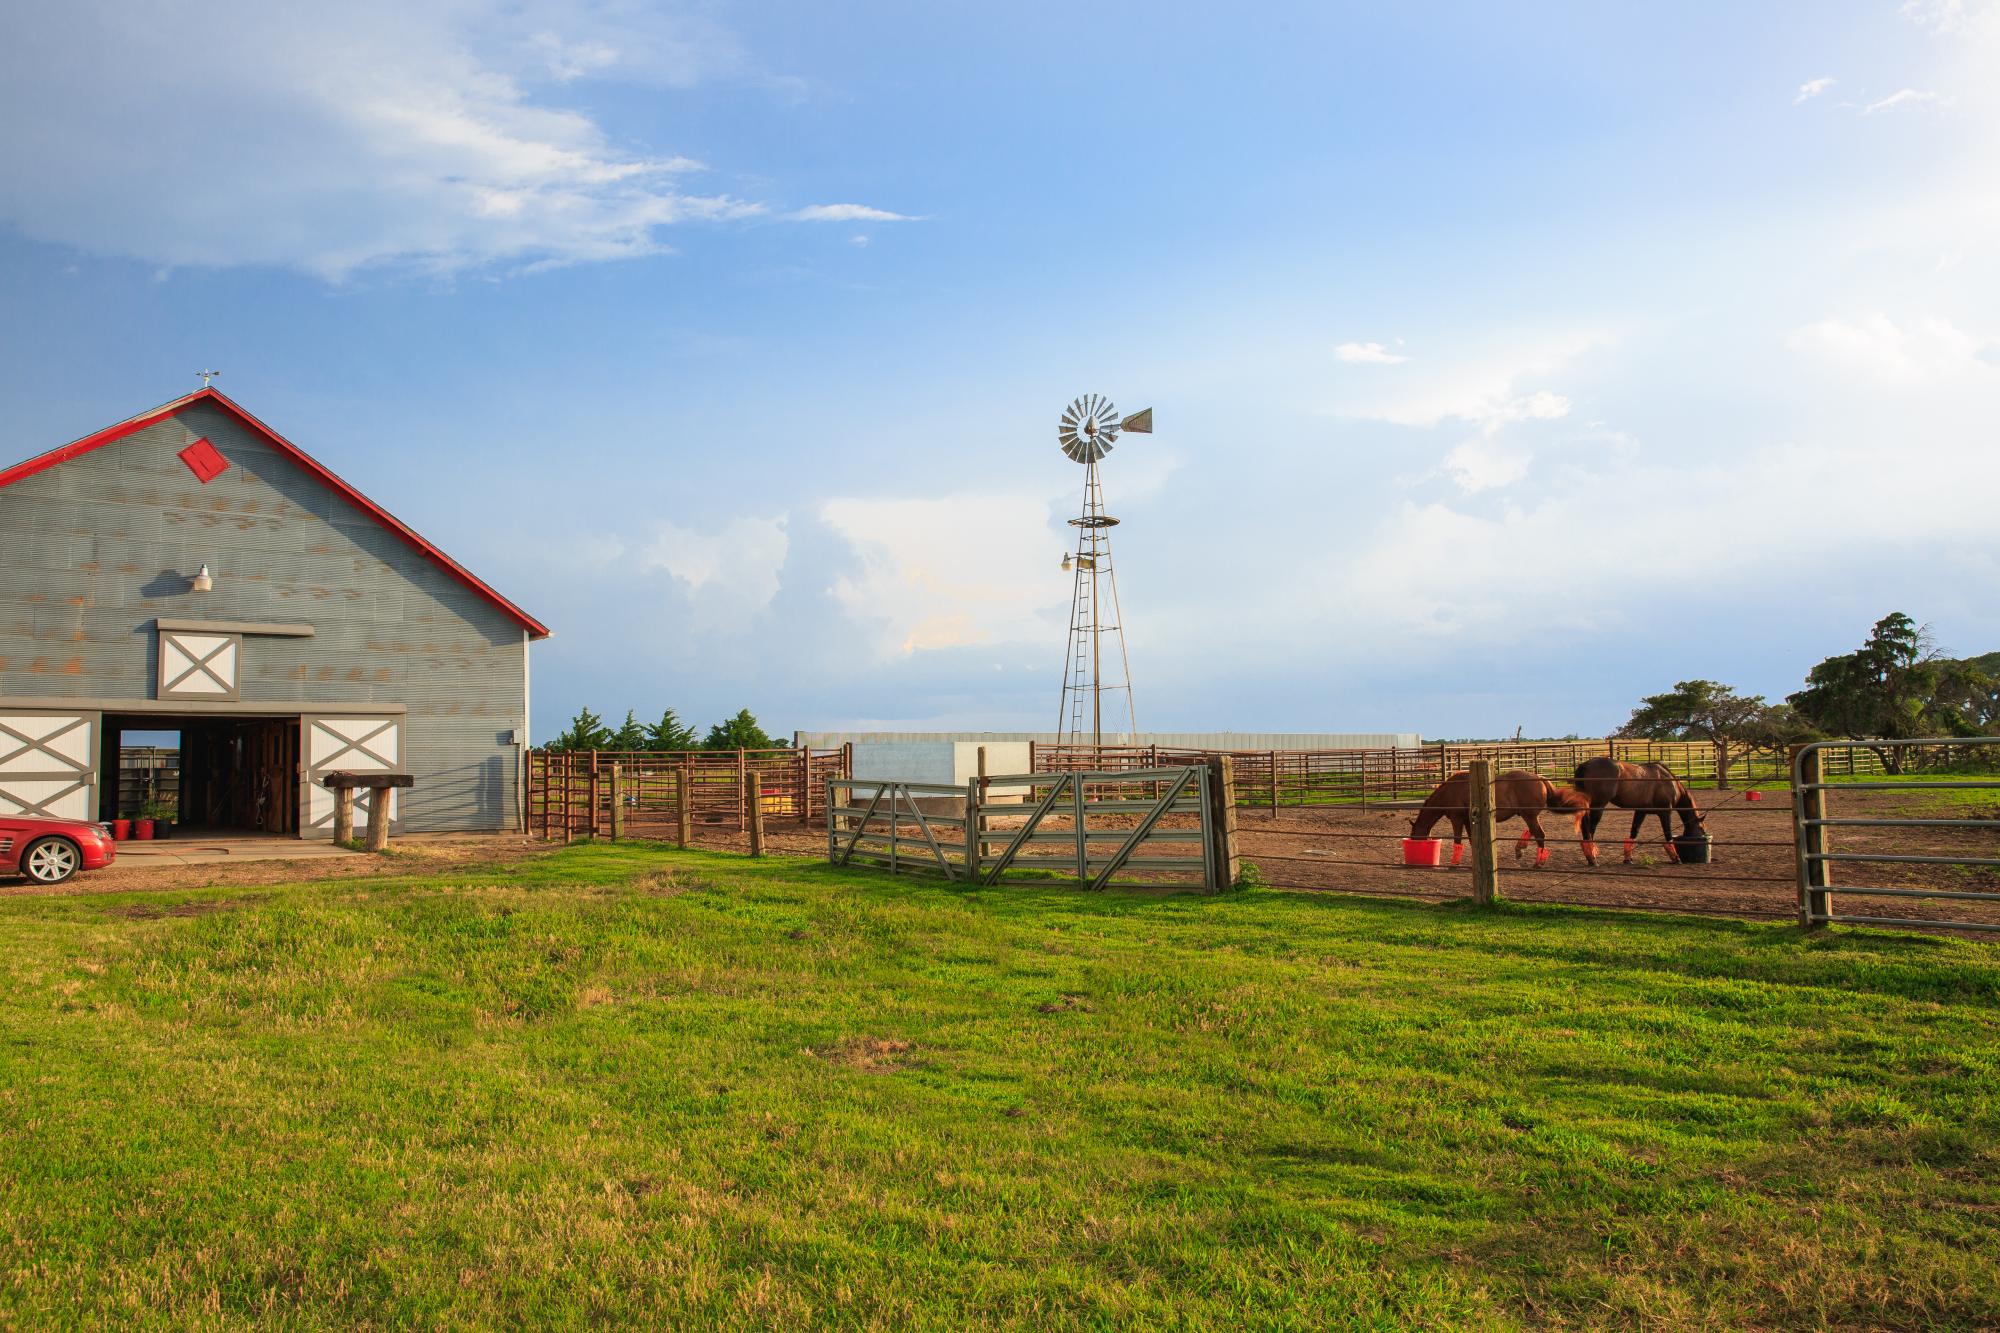 life in rural wichita, kansas with horses and barn